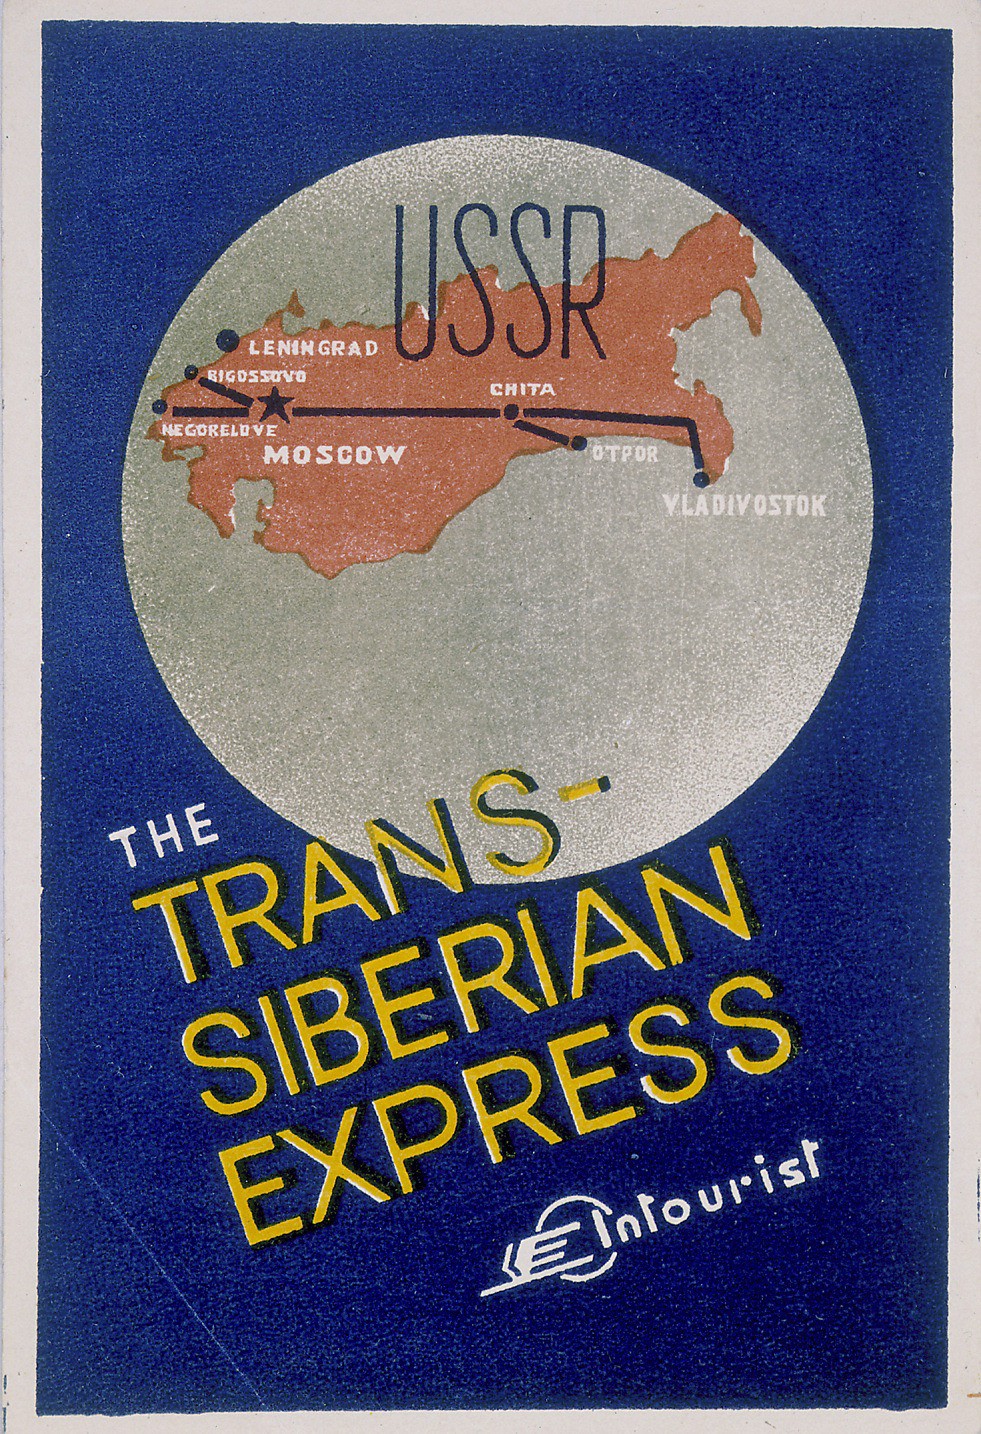 Suitcase label for Trans-Siberian Express